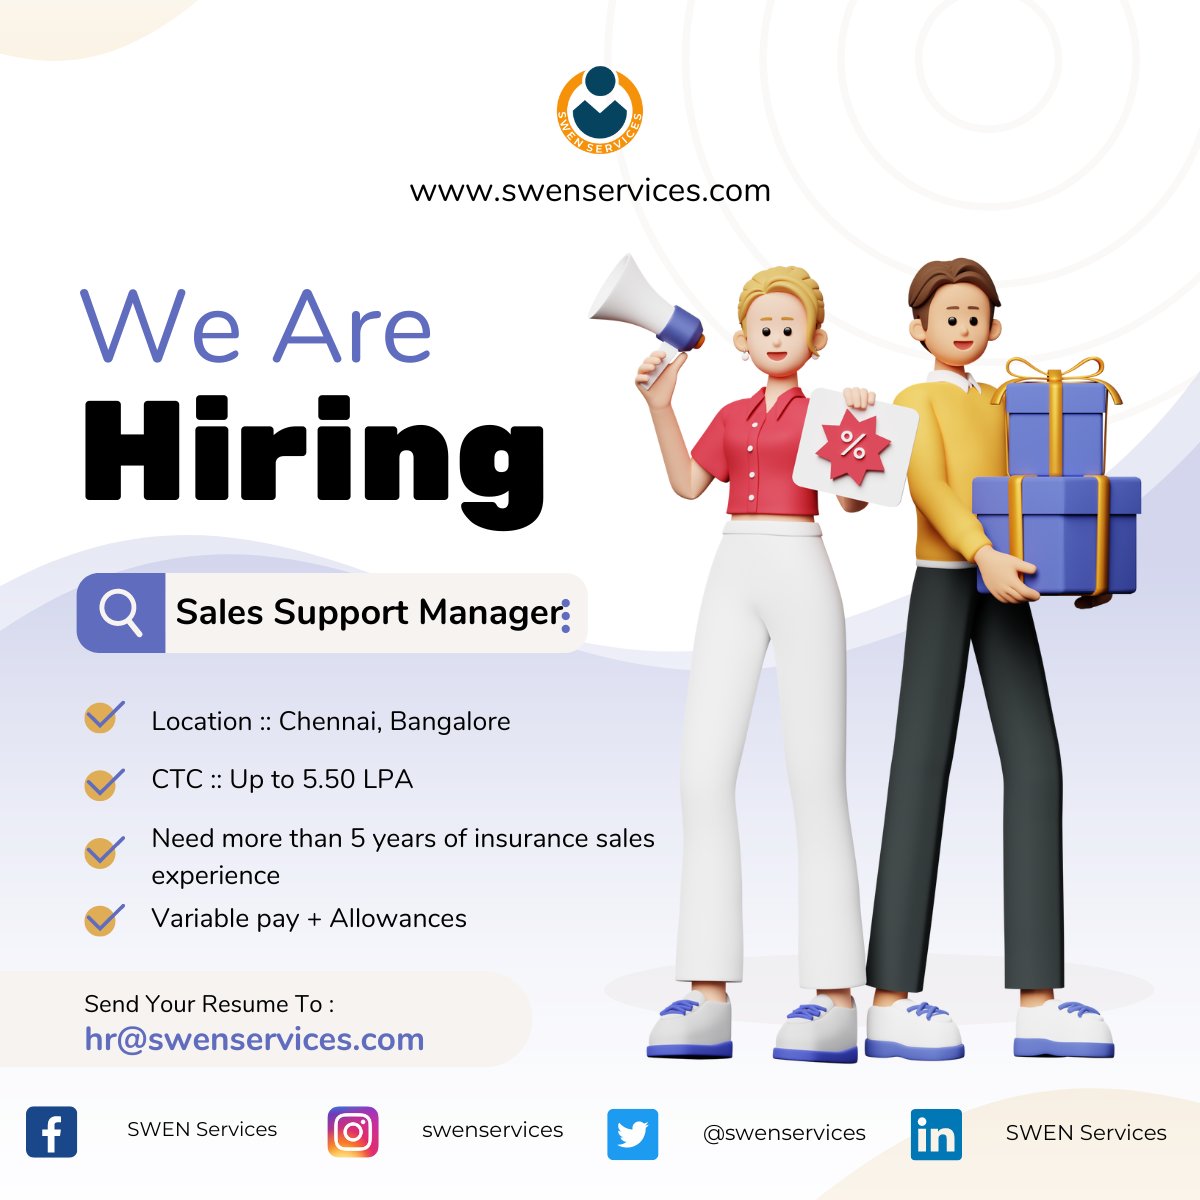 #hiring #salesmanager
Hey there, looking for job change?
We are hiring for leading BFSI company for Sales Manager role,
Location :: Chennai, Bangalore
CTC :: Up to 5.50 LPA + Incentives + Allowances
Need more than 5 years of experience in insurance sales.